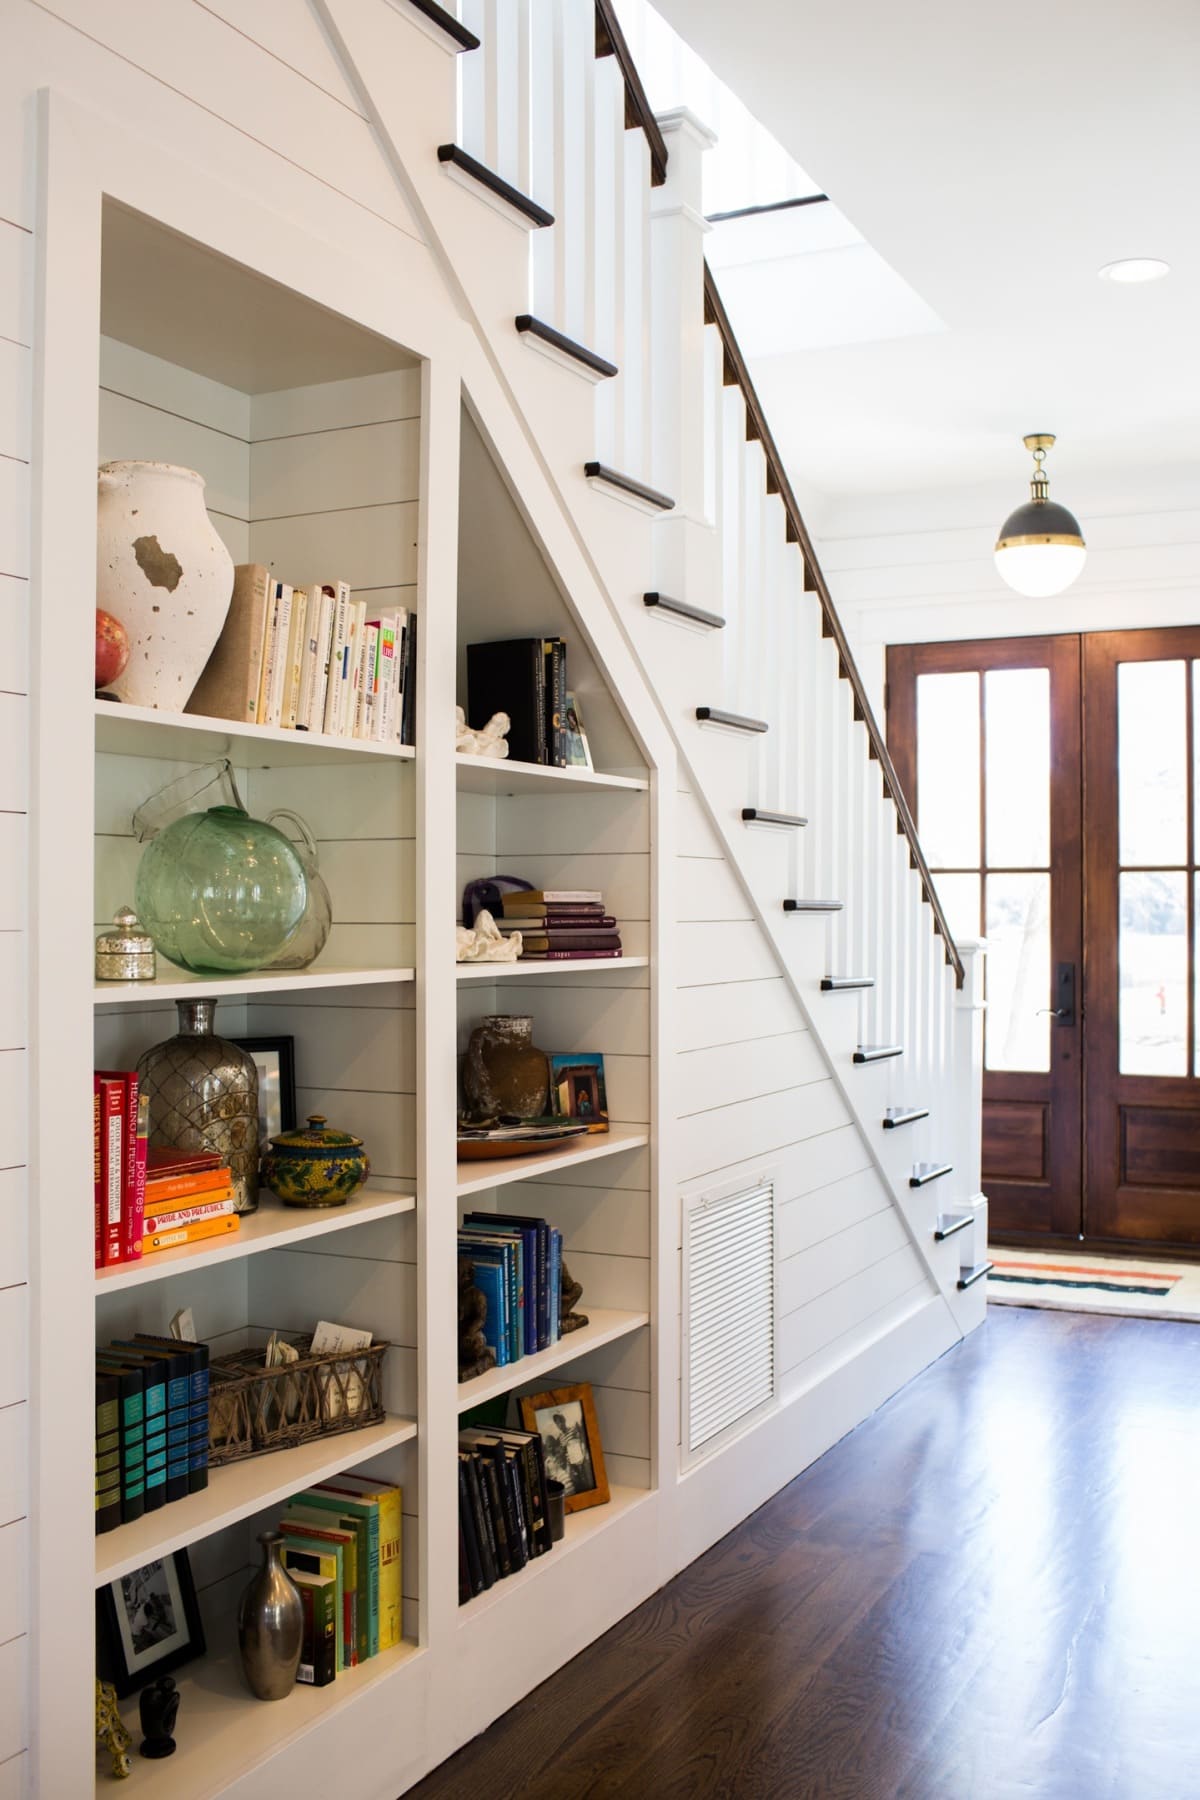 30 awesome understair ideas to add to your bag - 119